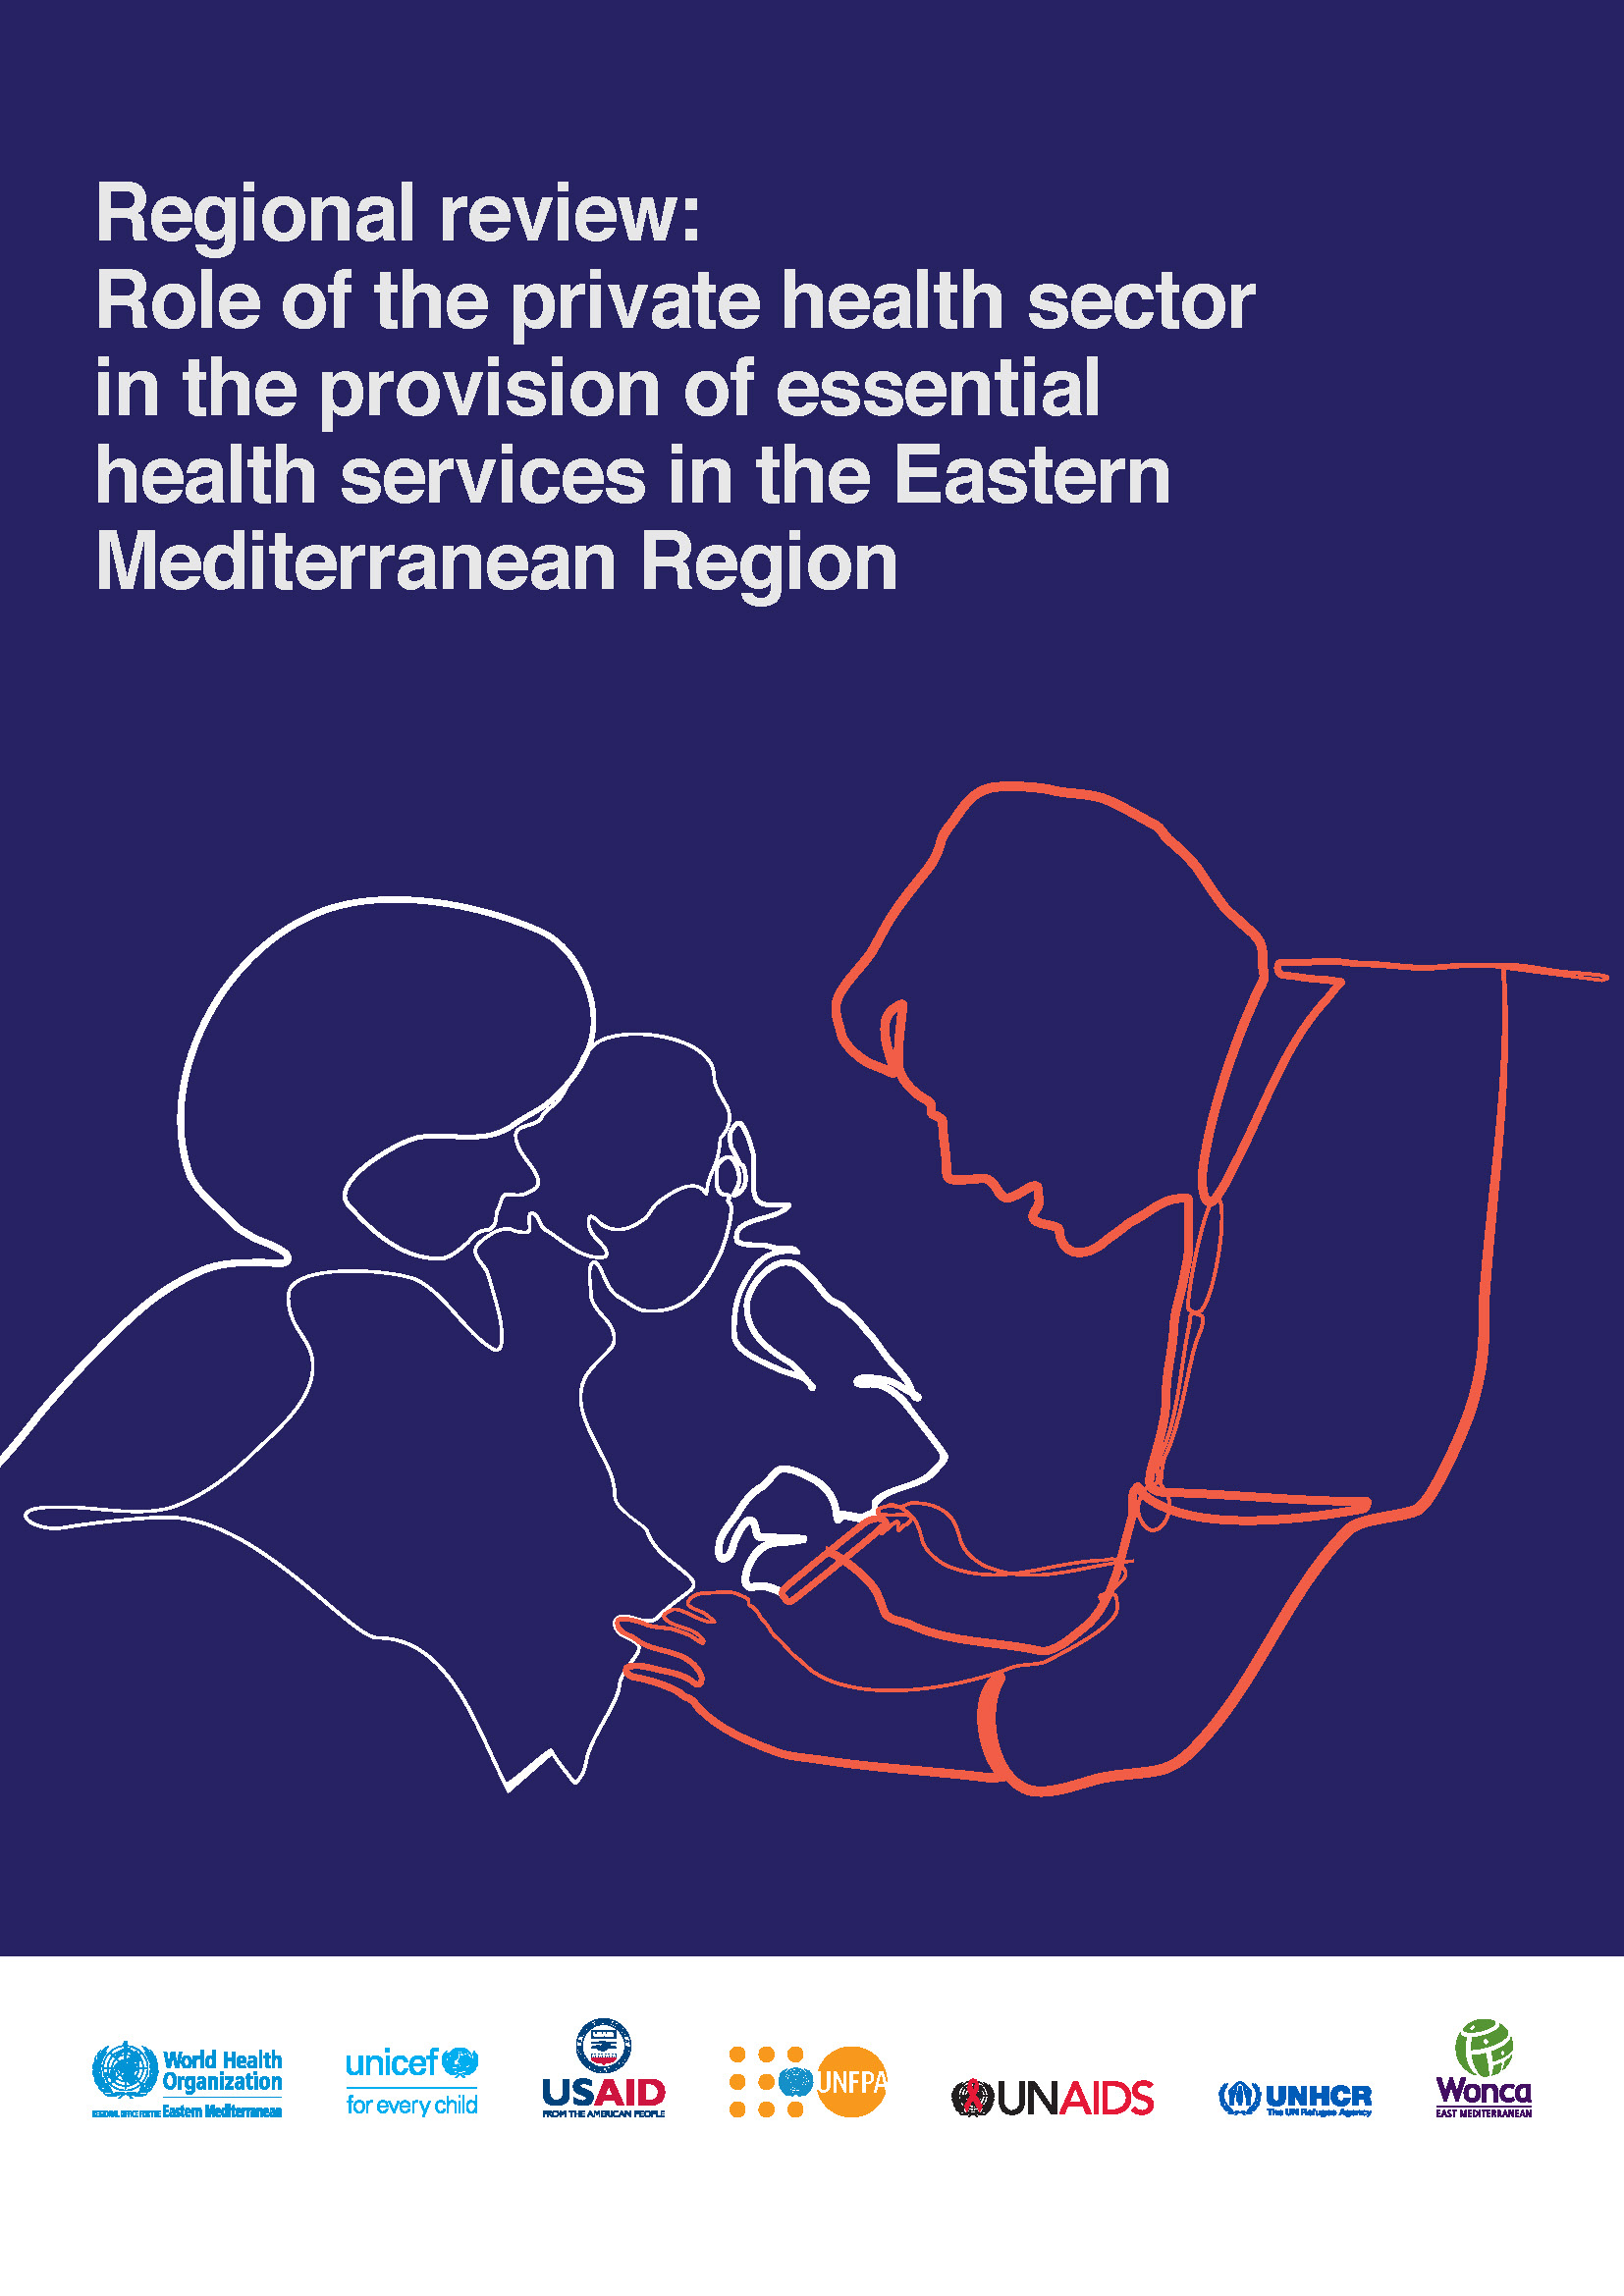 Regional review: role of the private health sector in the provision of essential health services in the Eastern Mediterranean Region